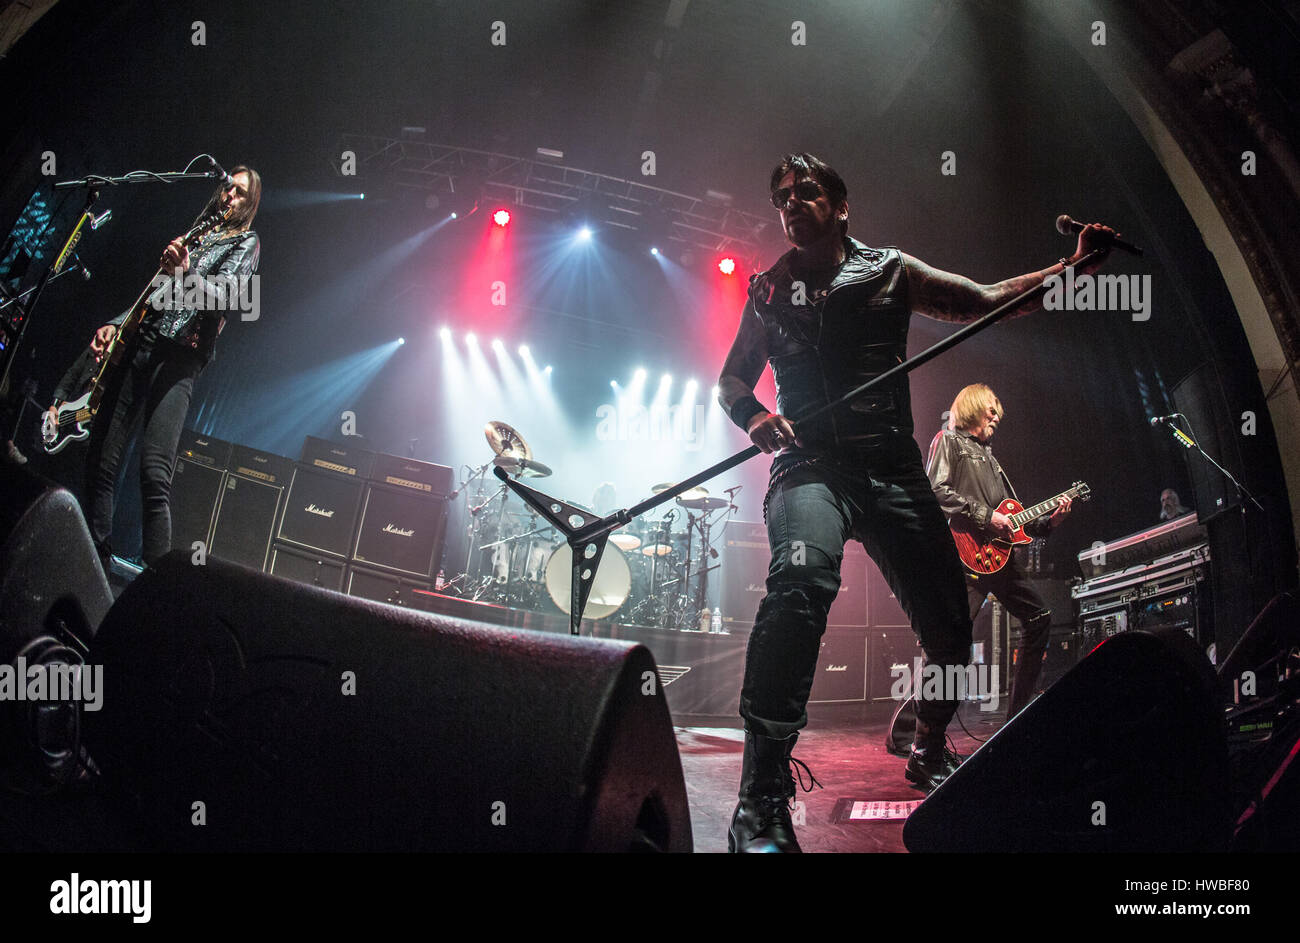 Bournemouth, Royaume-Uni. Mar 19, 2017. Black Star Riders live at O2 Academy Bournemouth. Crédit : Charlie Raven/Alamy Live News Banque D'Images